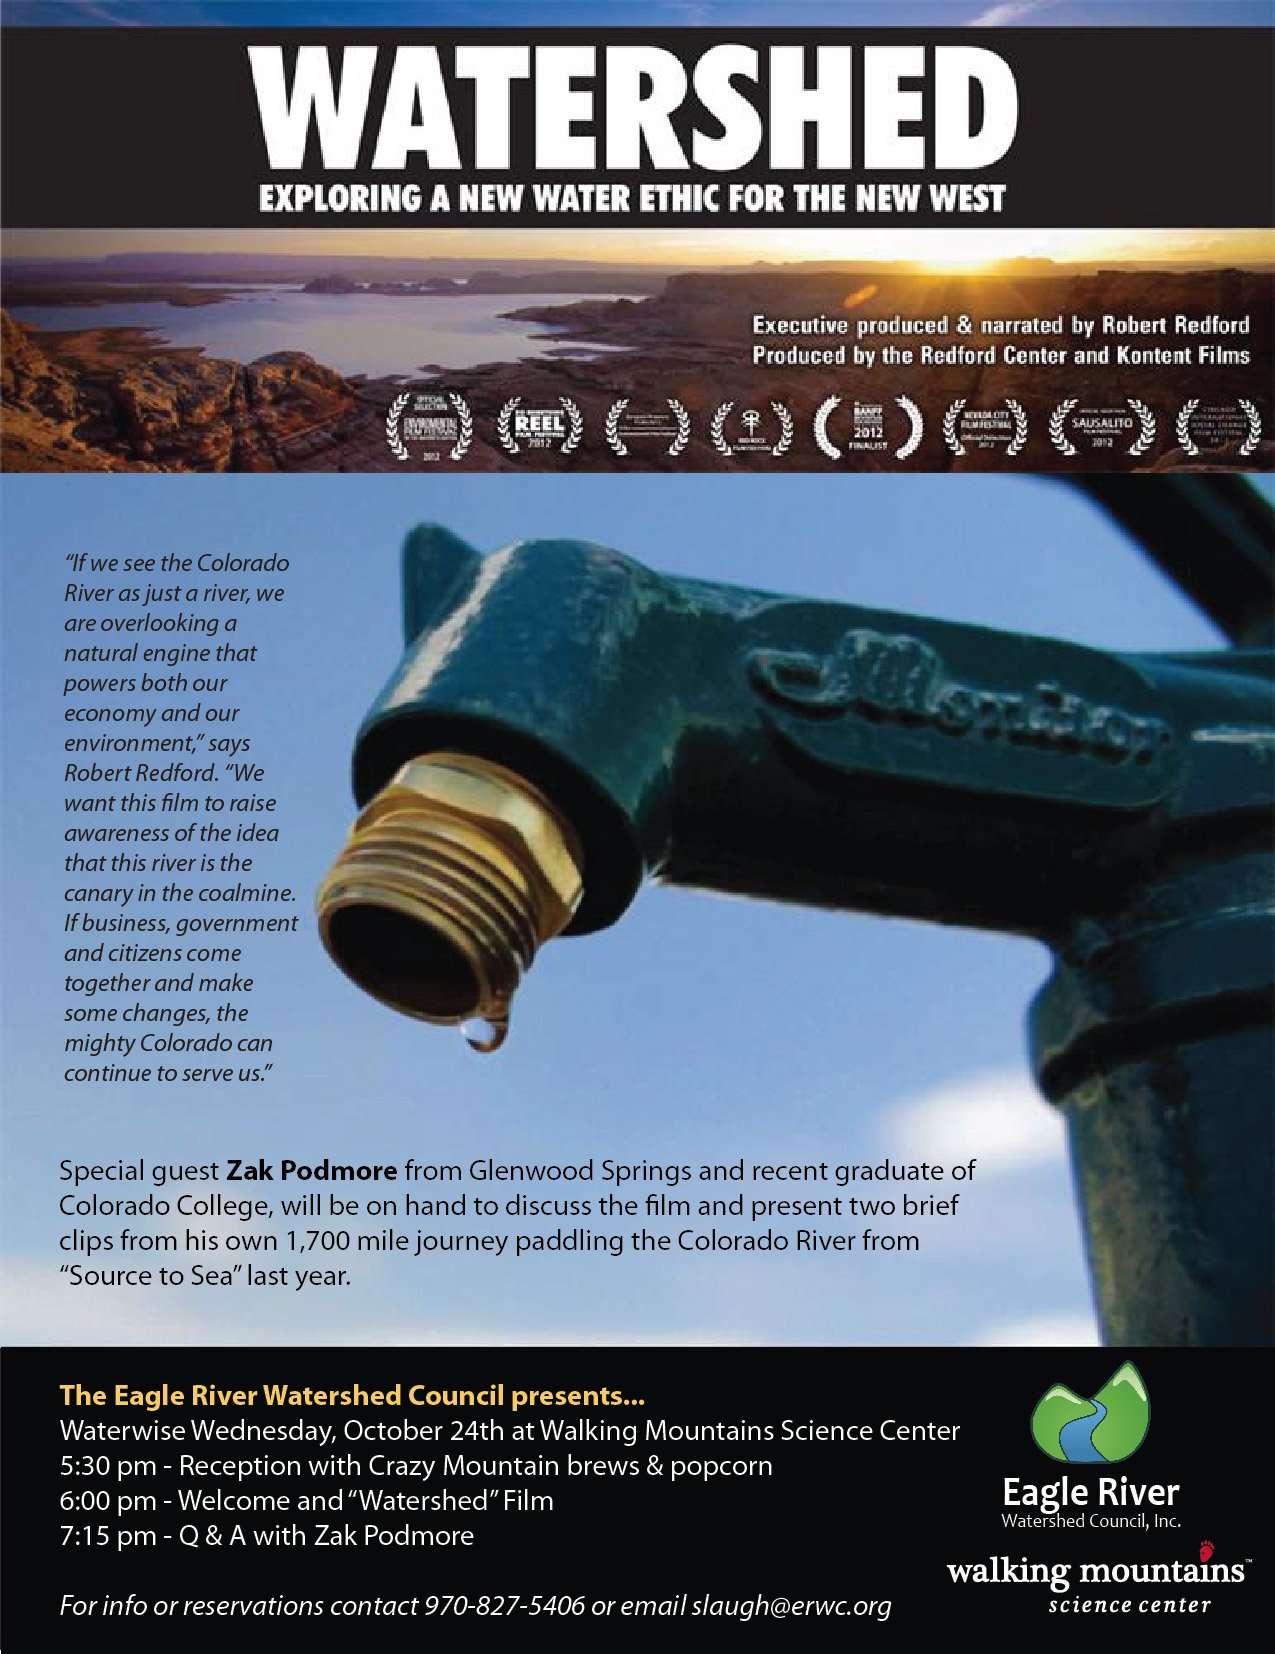 L'affiche du film Watershed: Exploring a New Water Ethic for the New West